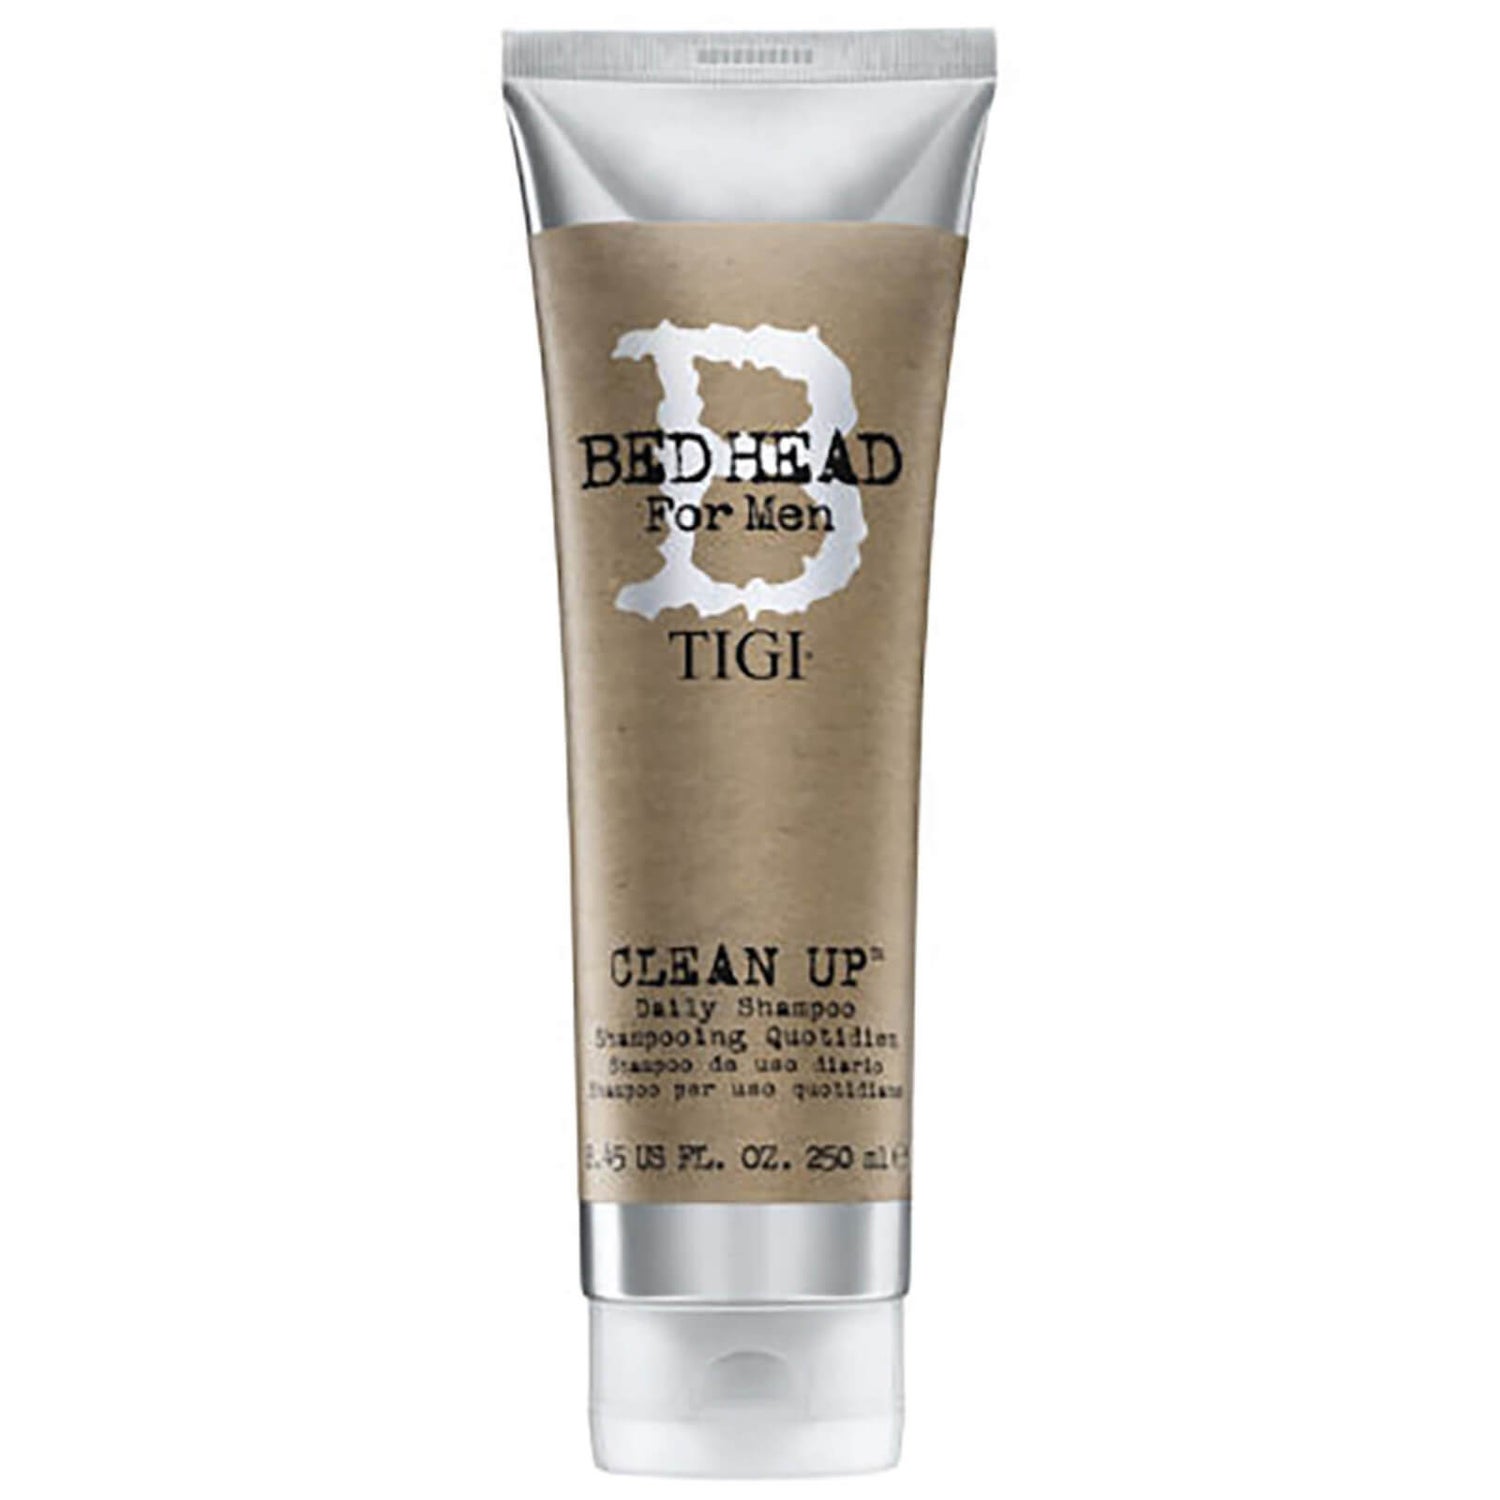 TIGI Bed Head for Men Clean Up Daily Shampoo (250ml) - FREE Delivery